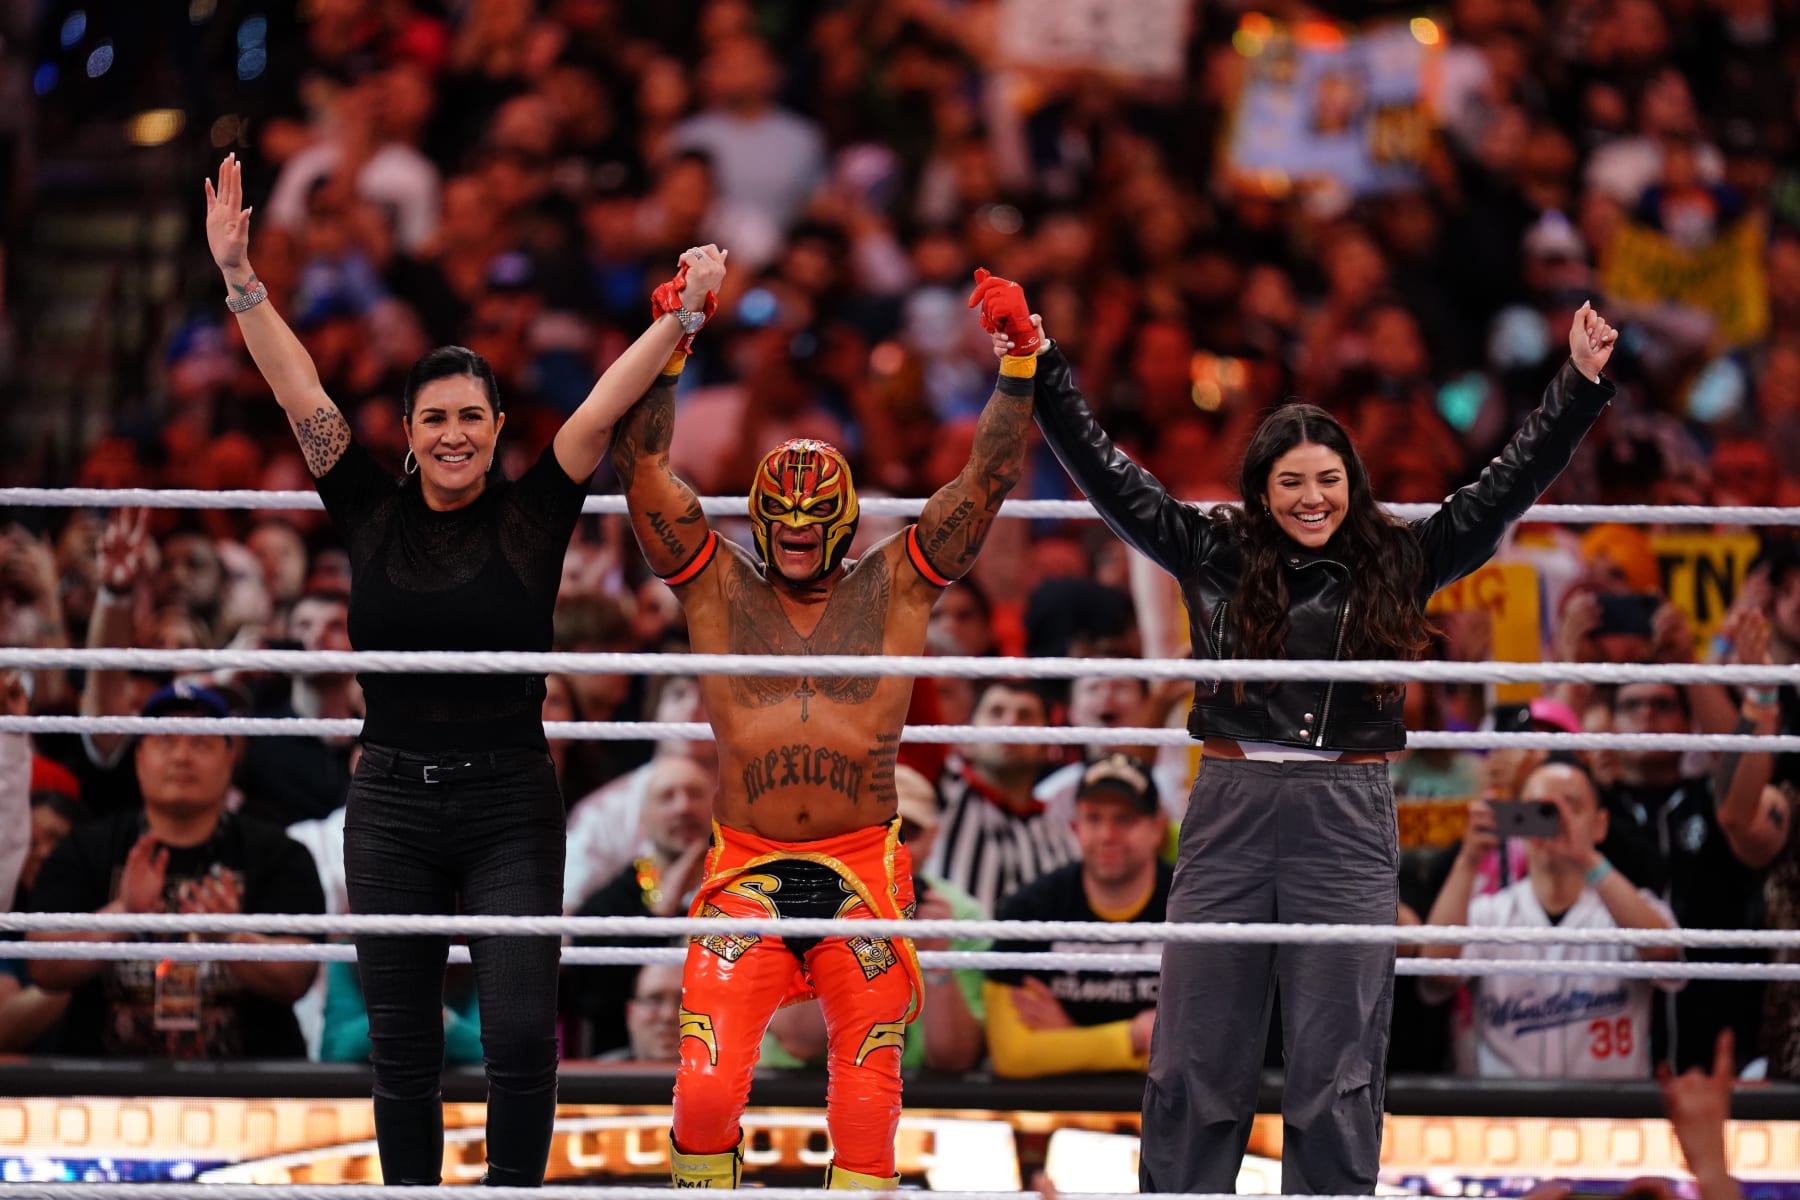 WWE star power shines in front of 80,000 for WrestleMania 39 at